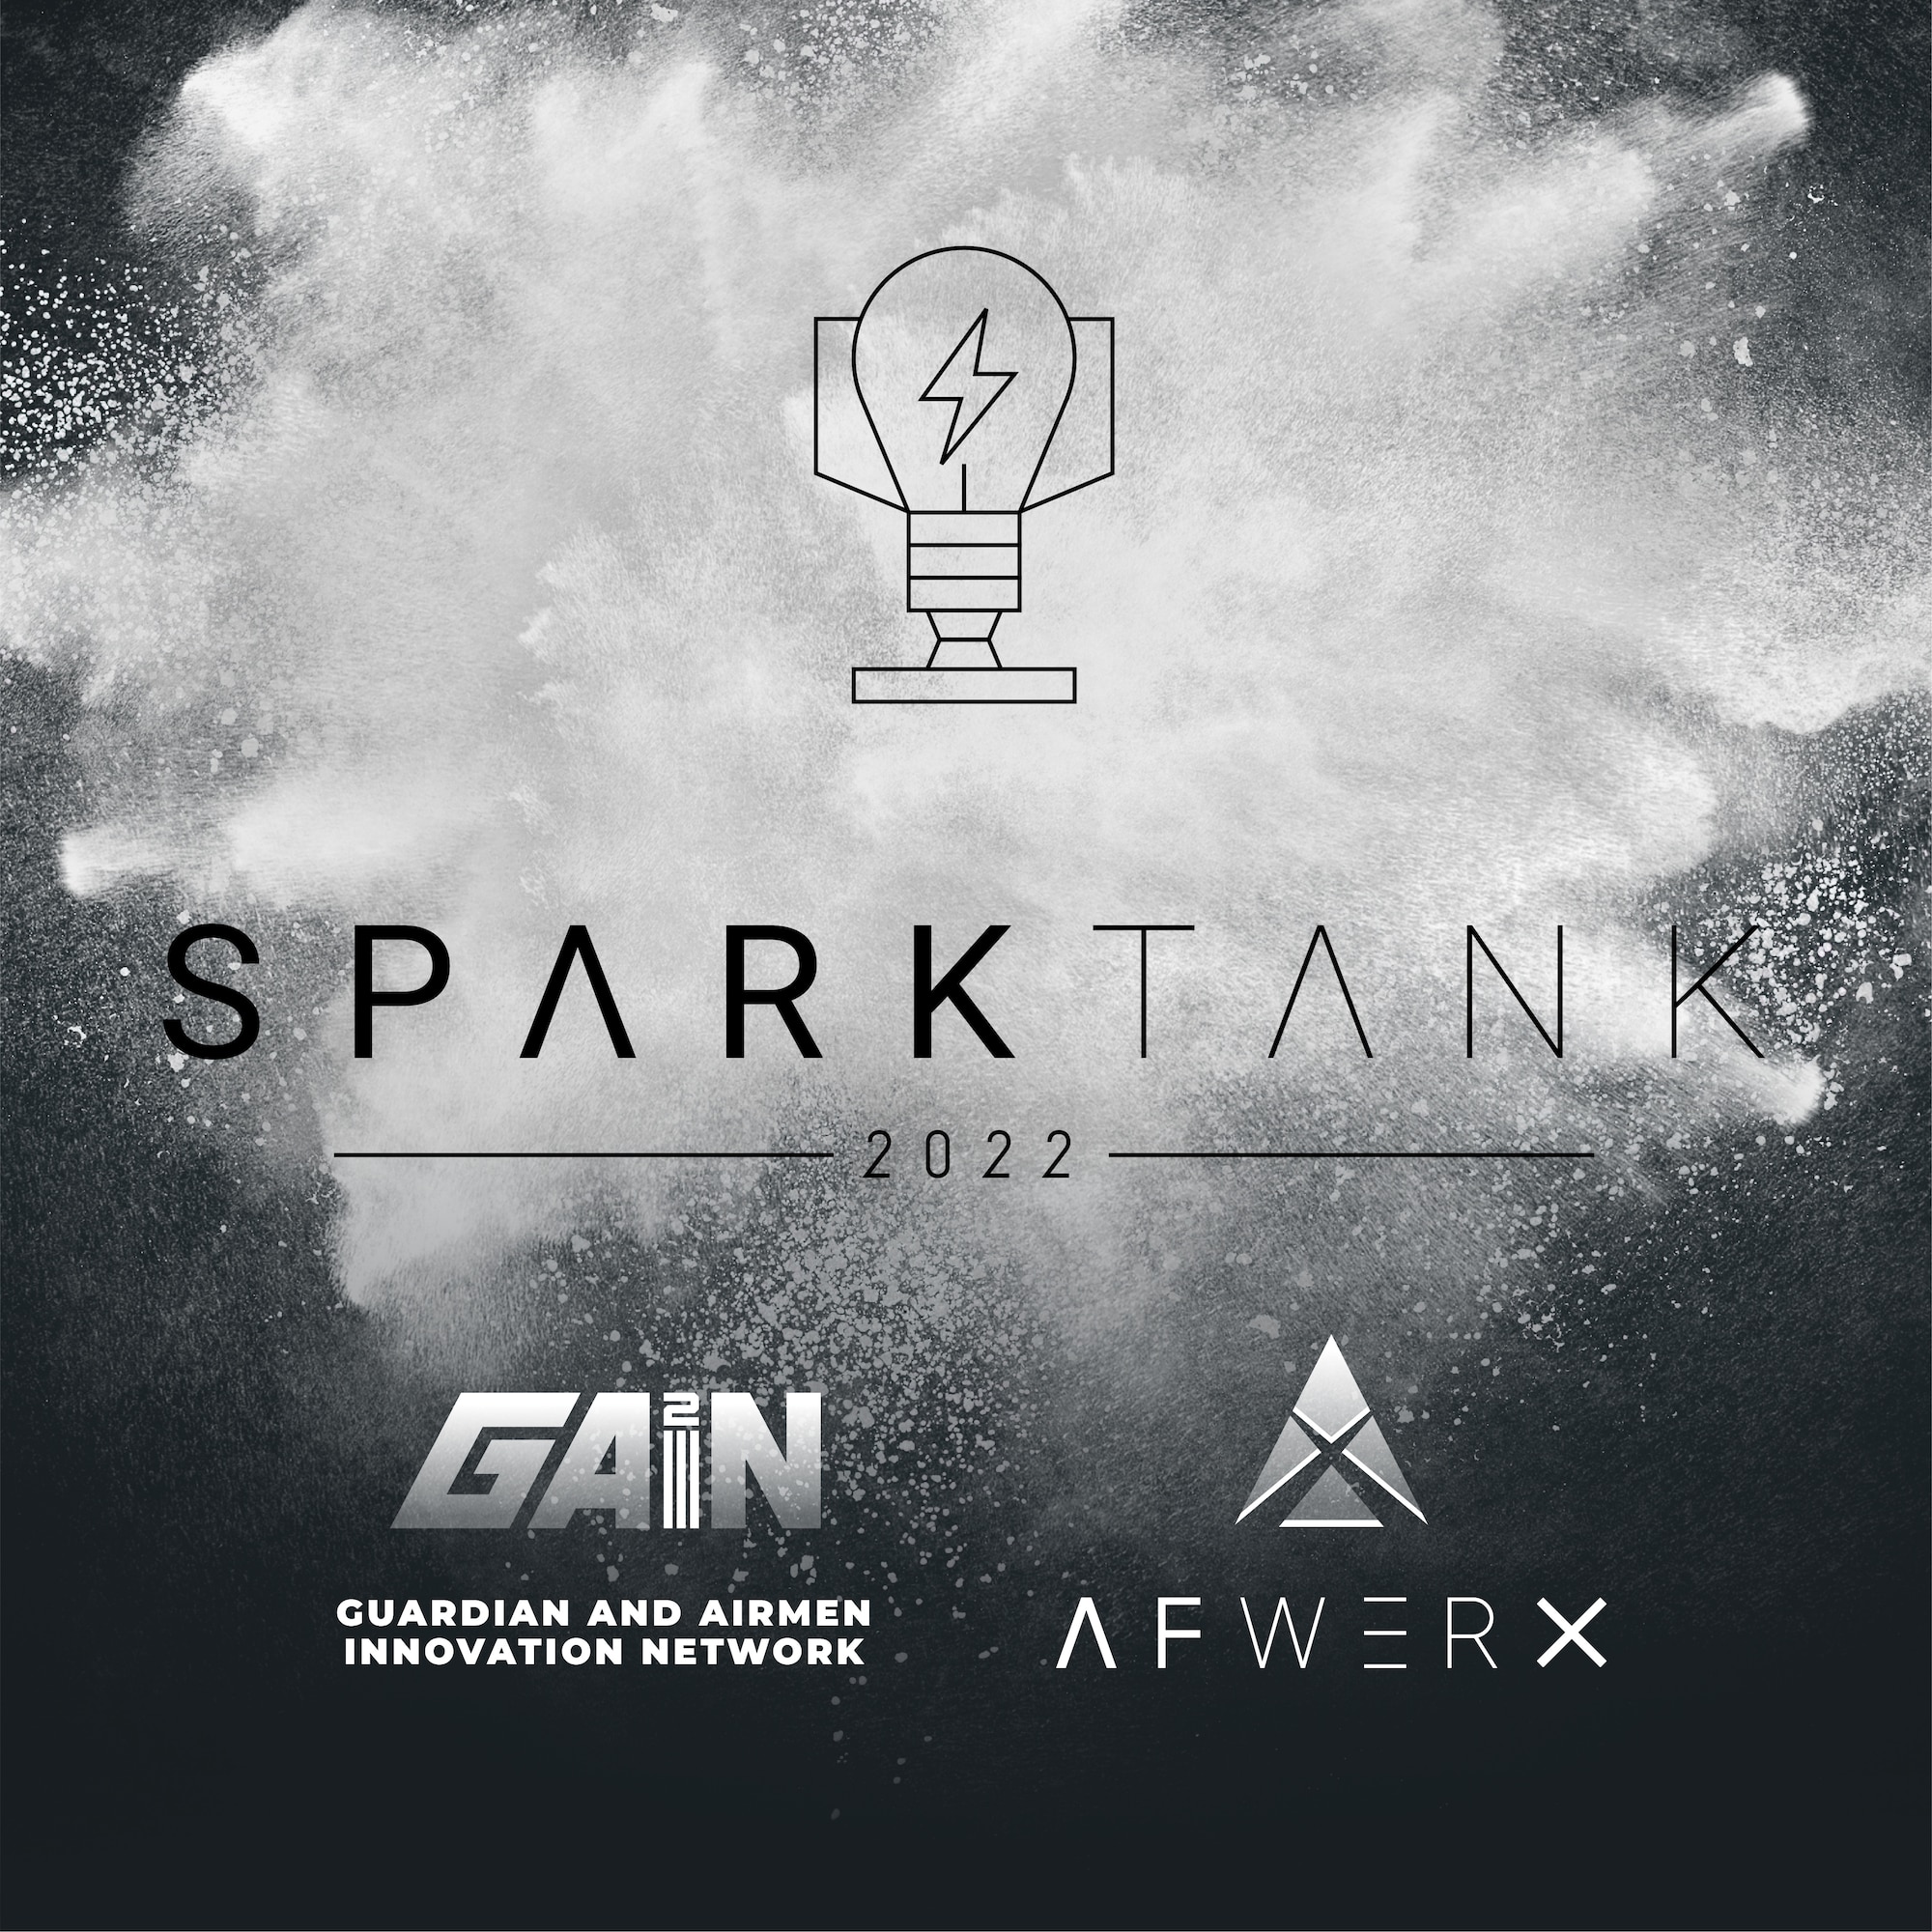 Gray/white graphic with the words "Spark Tank" in the middle